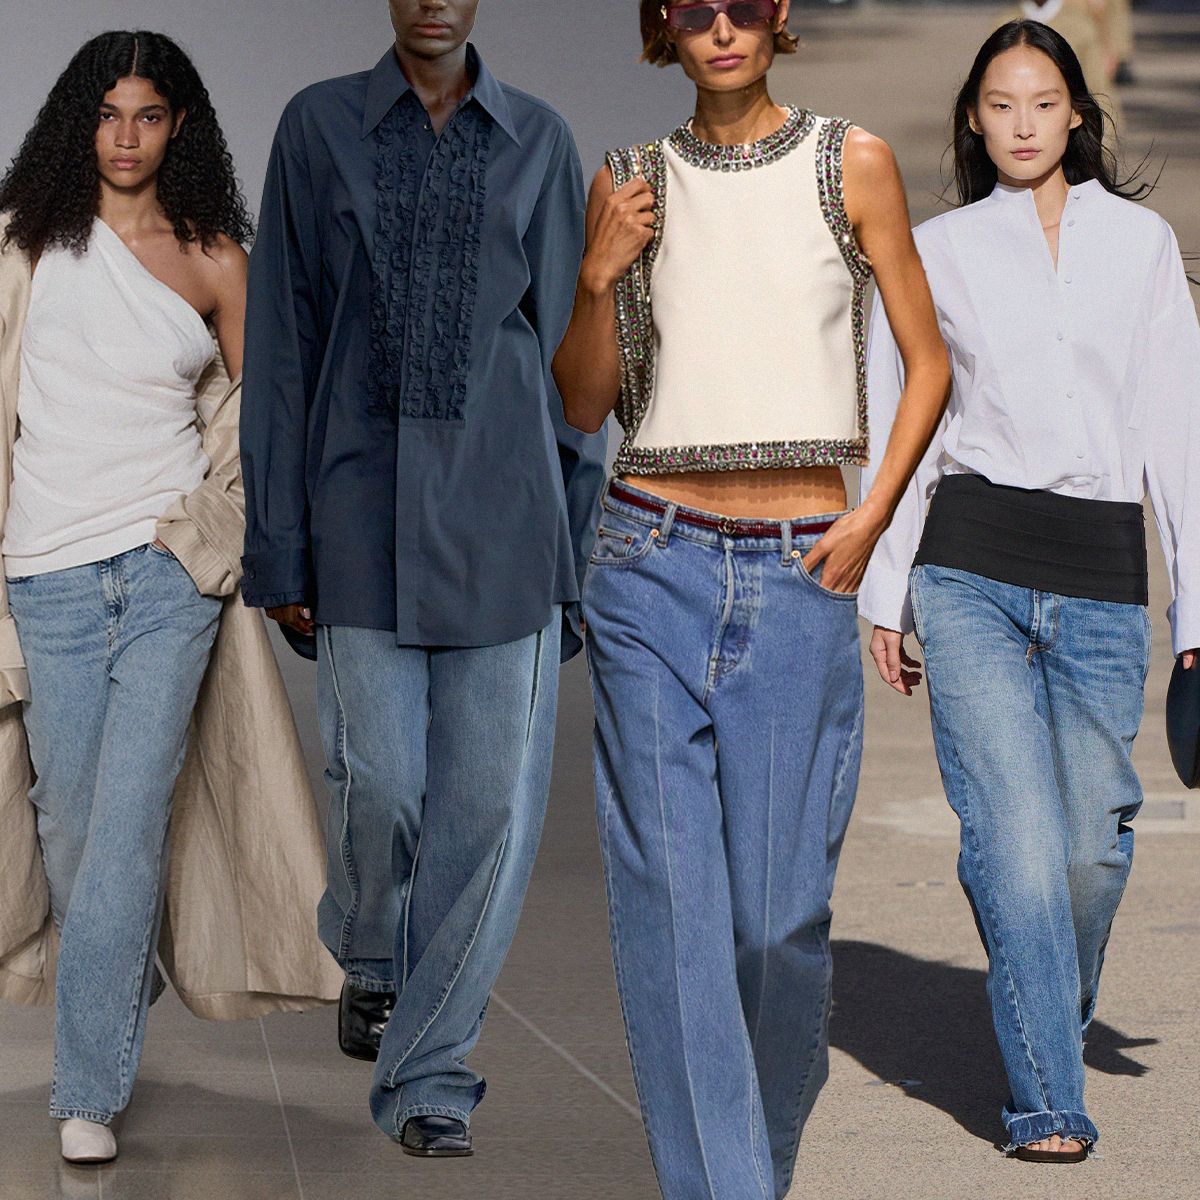 5 '90s Jean Trends That Have the Most Staying Power